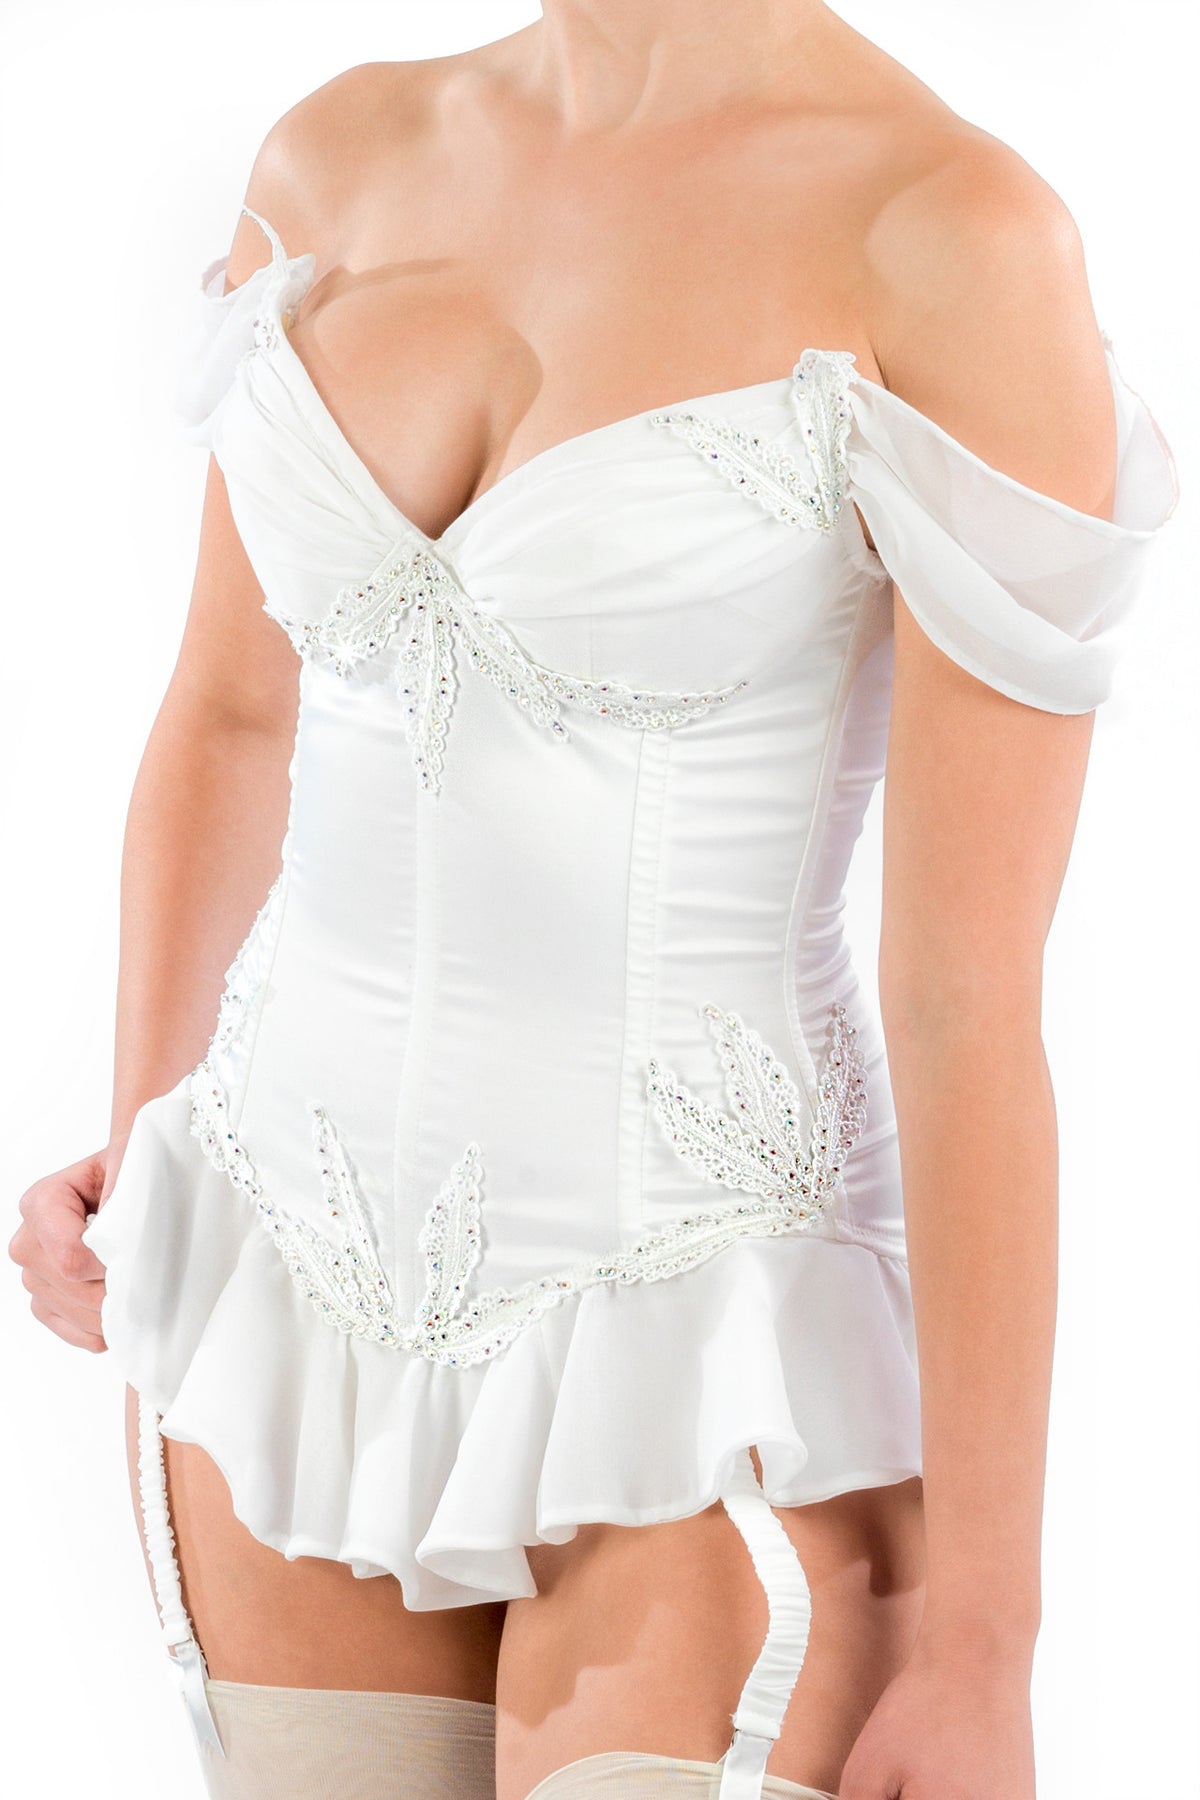 Bombshell Corset with Arm Swags and Skirt